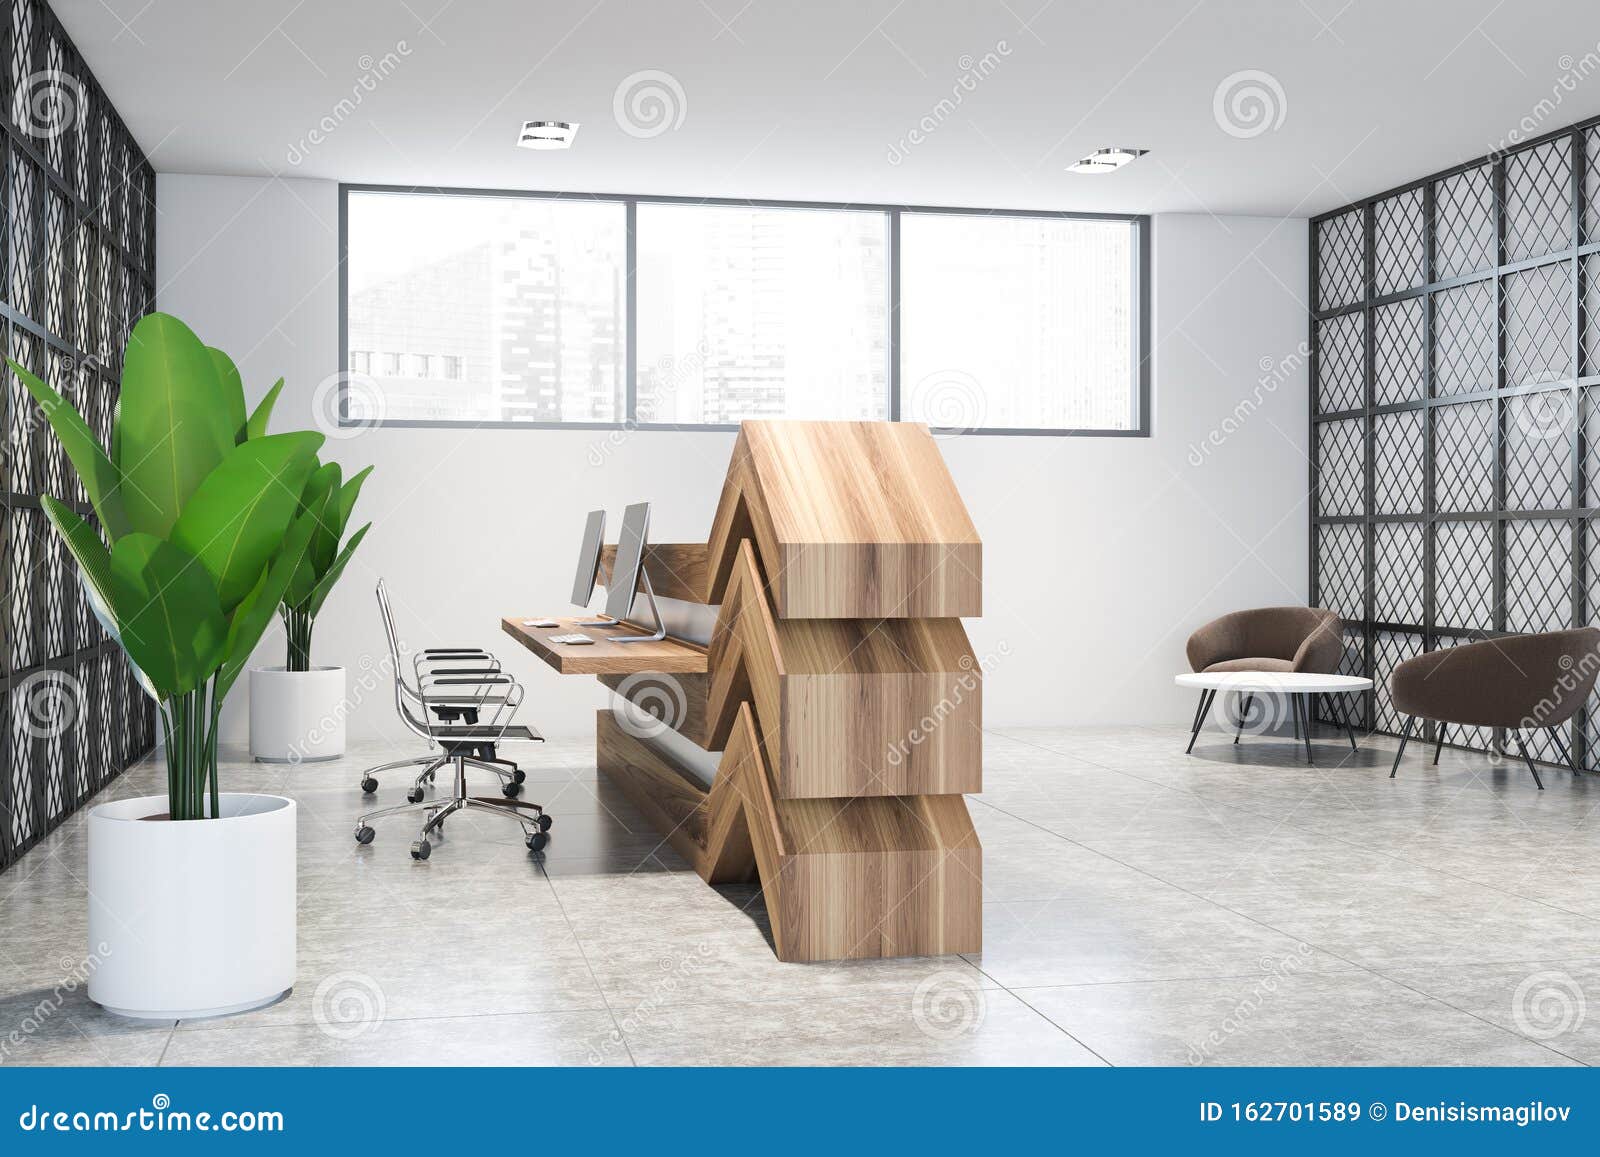 Wooden Reception In Modern Office Waiting Room Stock Illustration